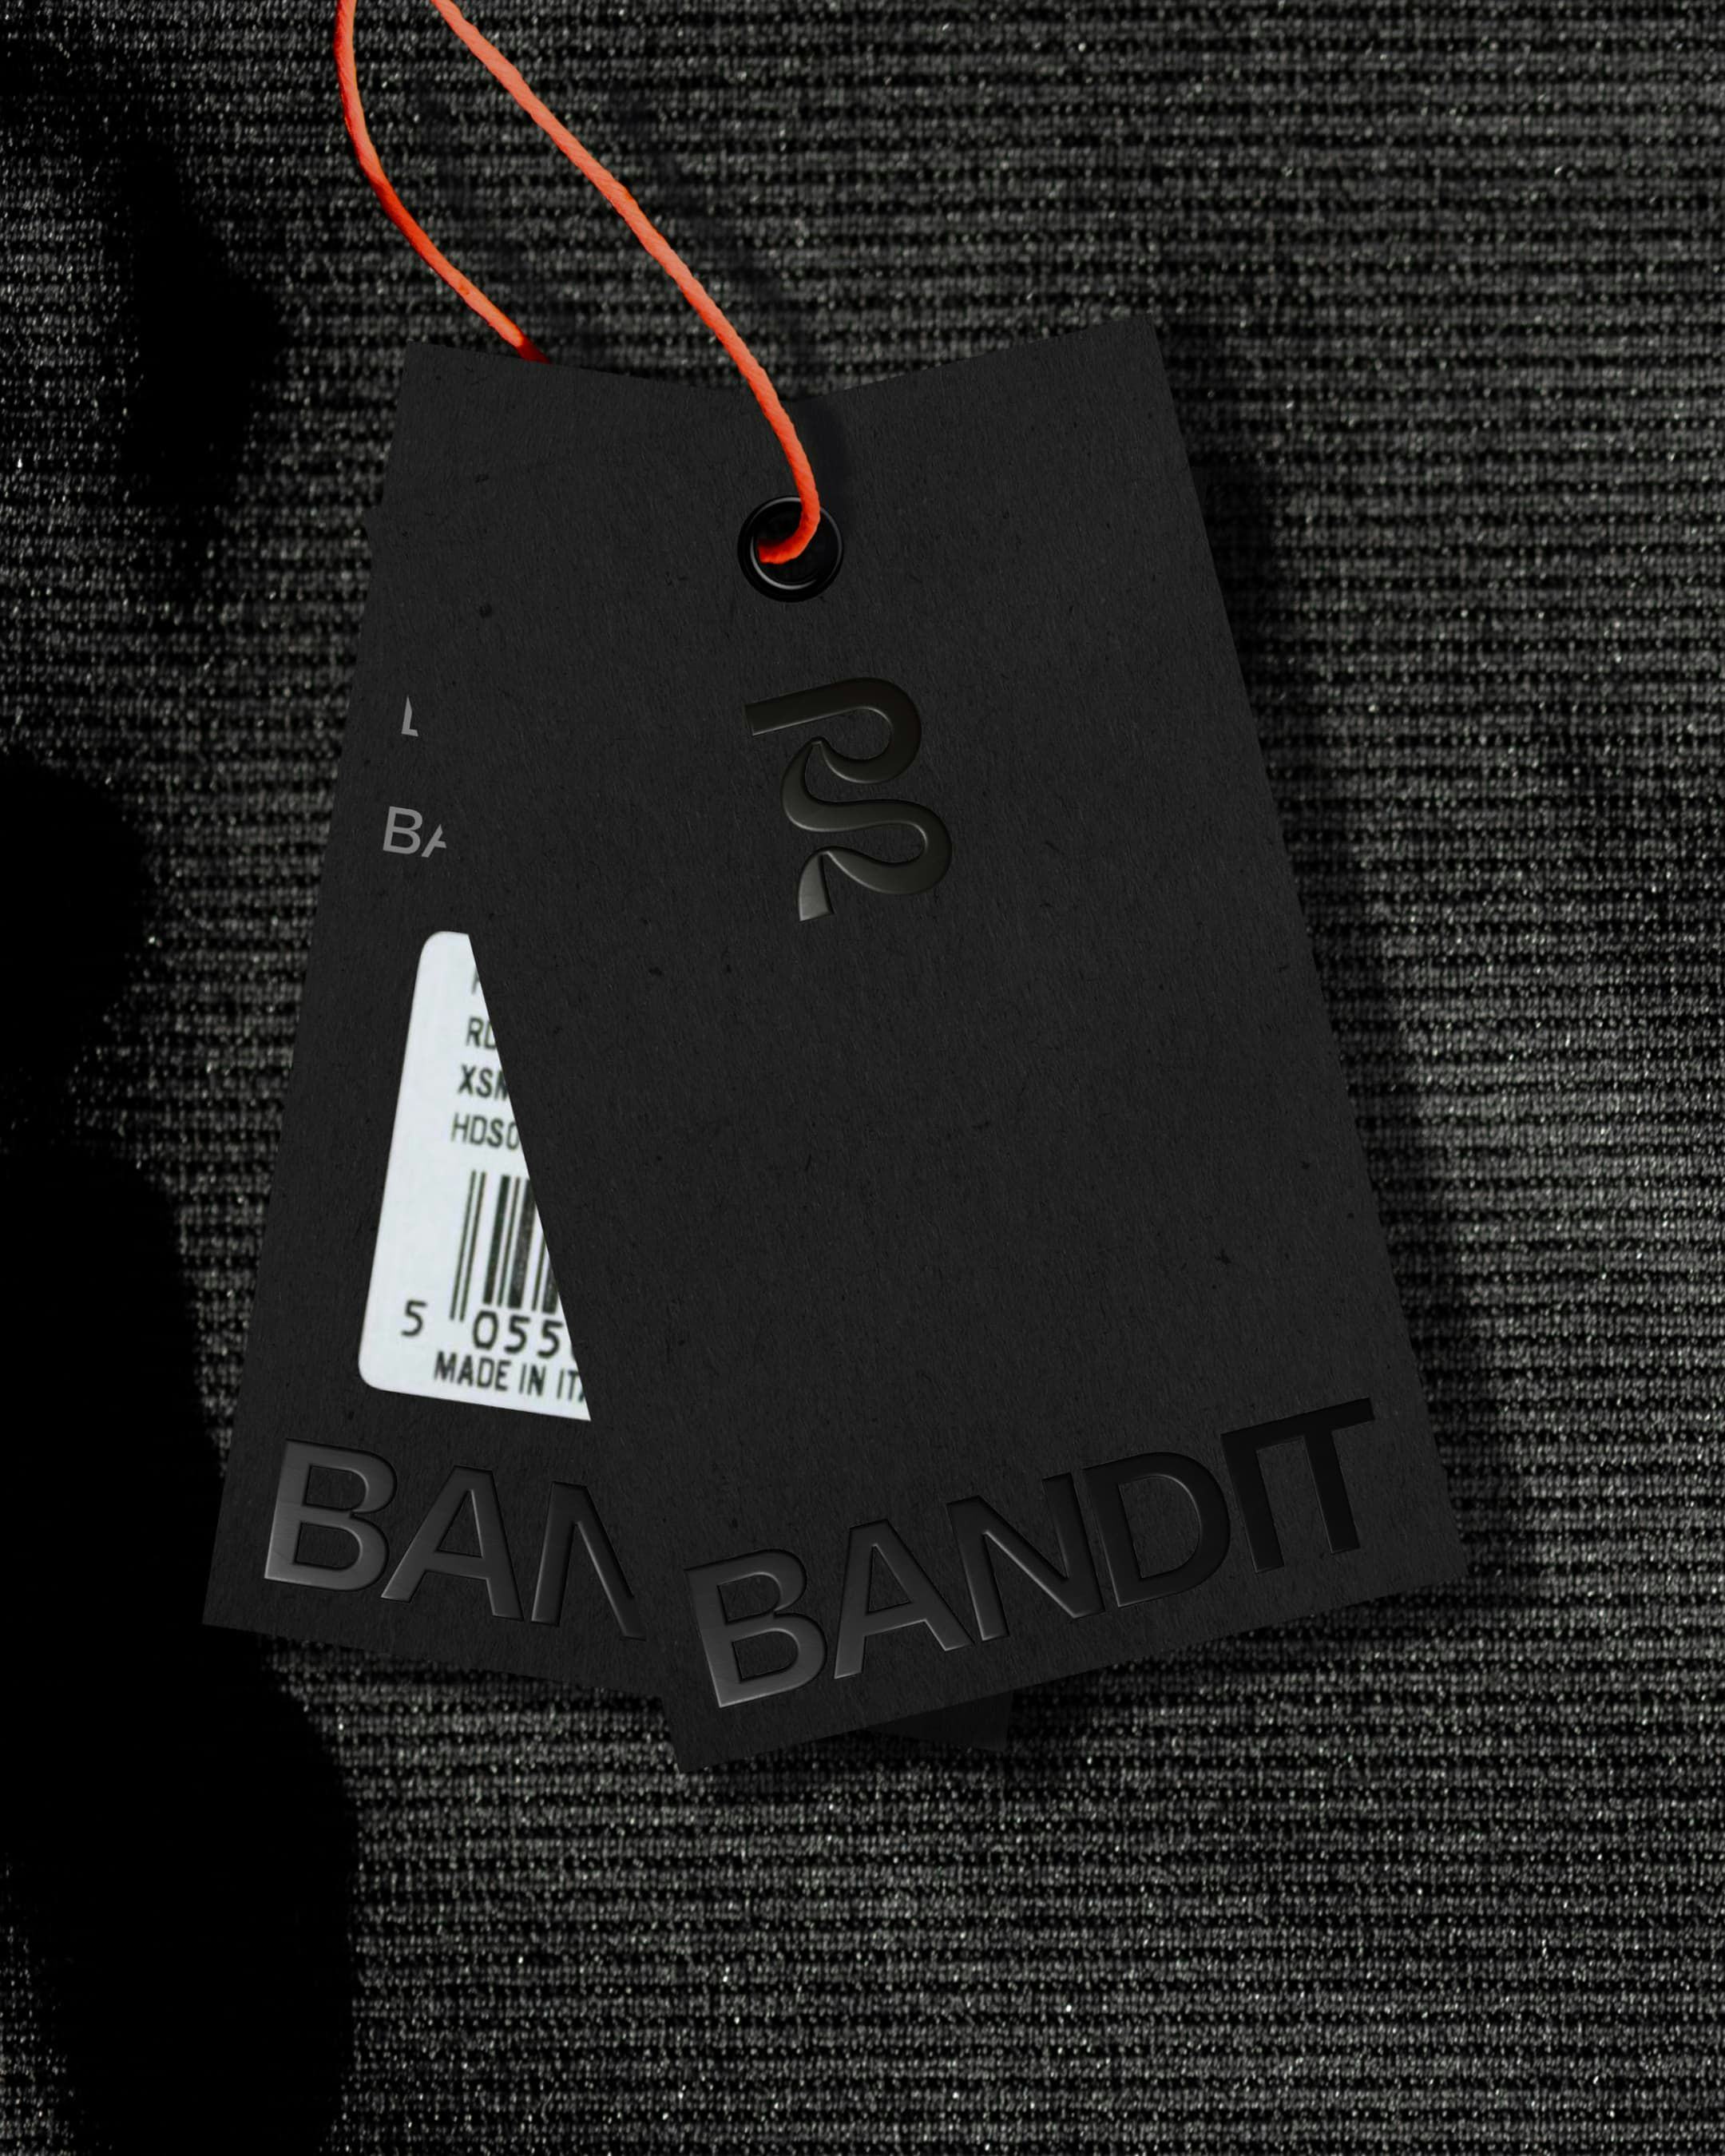 Hangtag packaging design for Bandit Running by View Source.